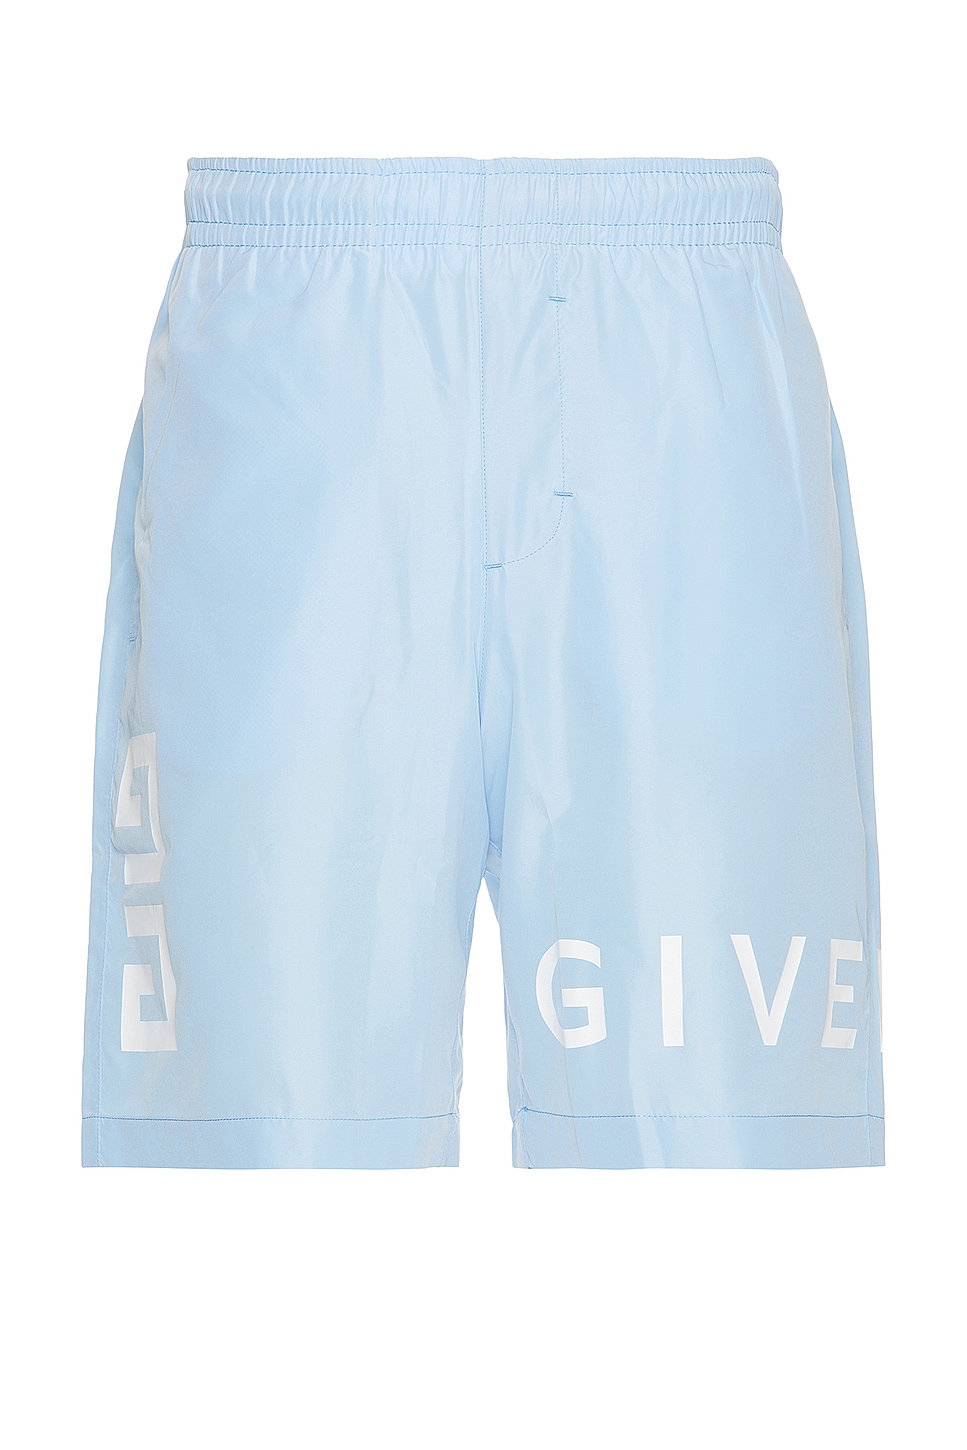 Image 1 of Givenchy Long Swimshort in Baby Blue